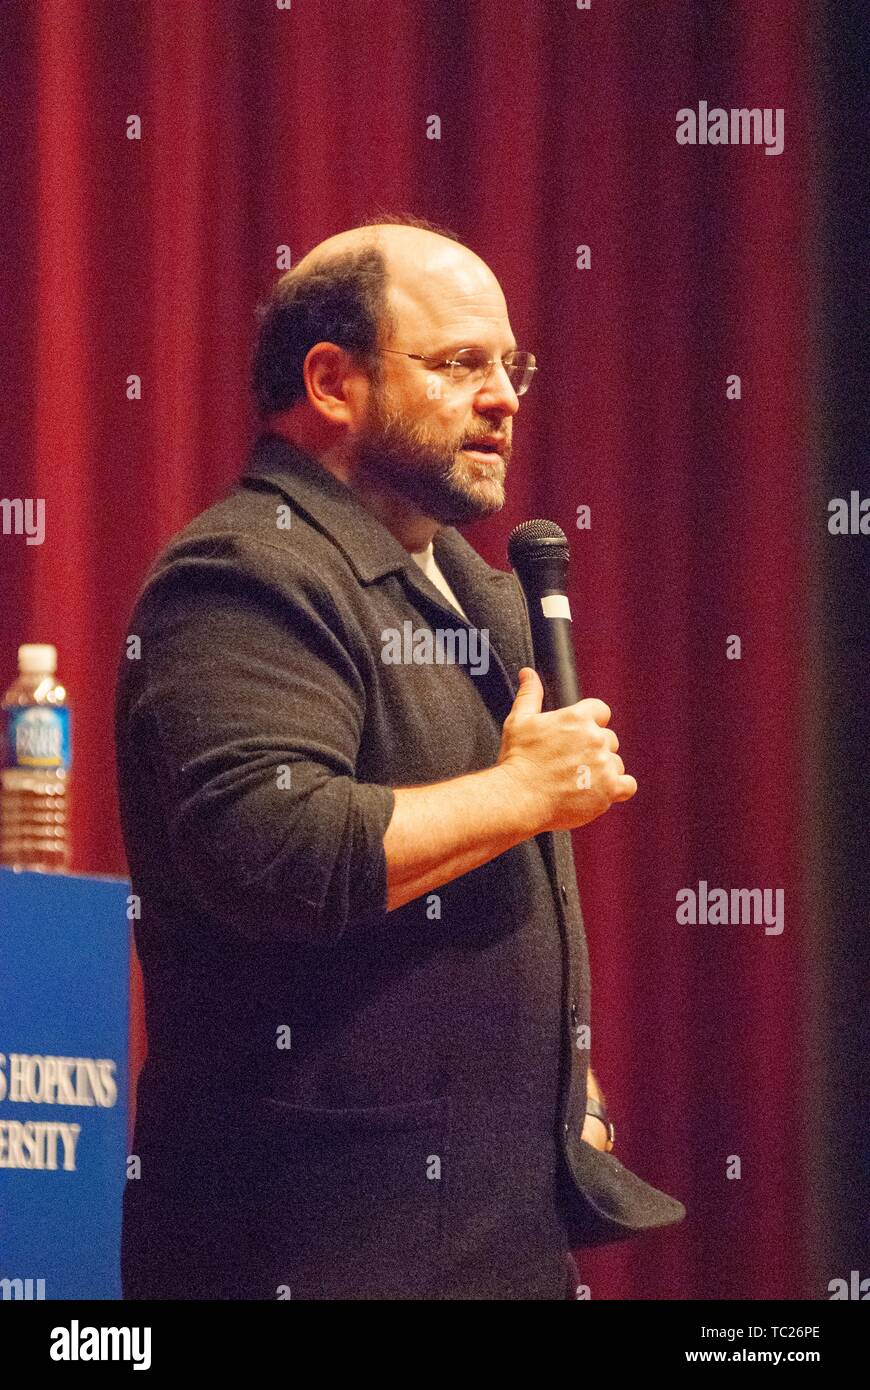 Profile shot of actor and comedian Jason Alexander speaking during a Milton S Eisenhower Symposium, Homewood Campus of Johns Hopkins University, Baltimore, Maryland, October 13, 2006. From the Homewood Photography Collection. () Stock Photo